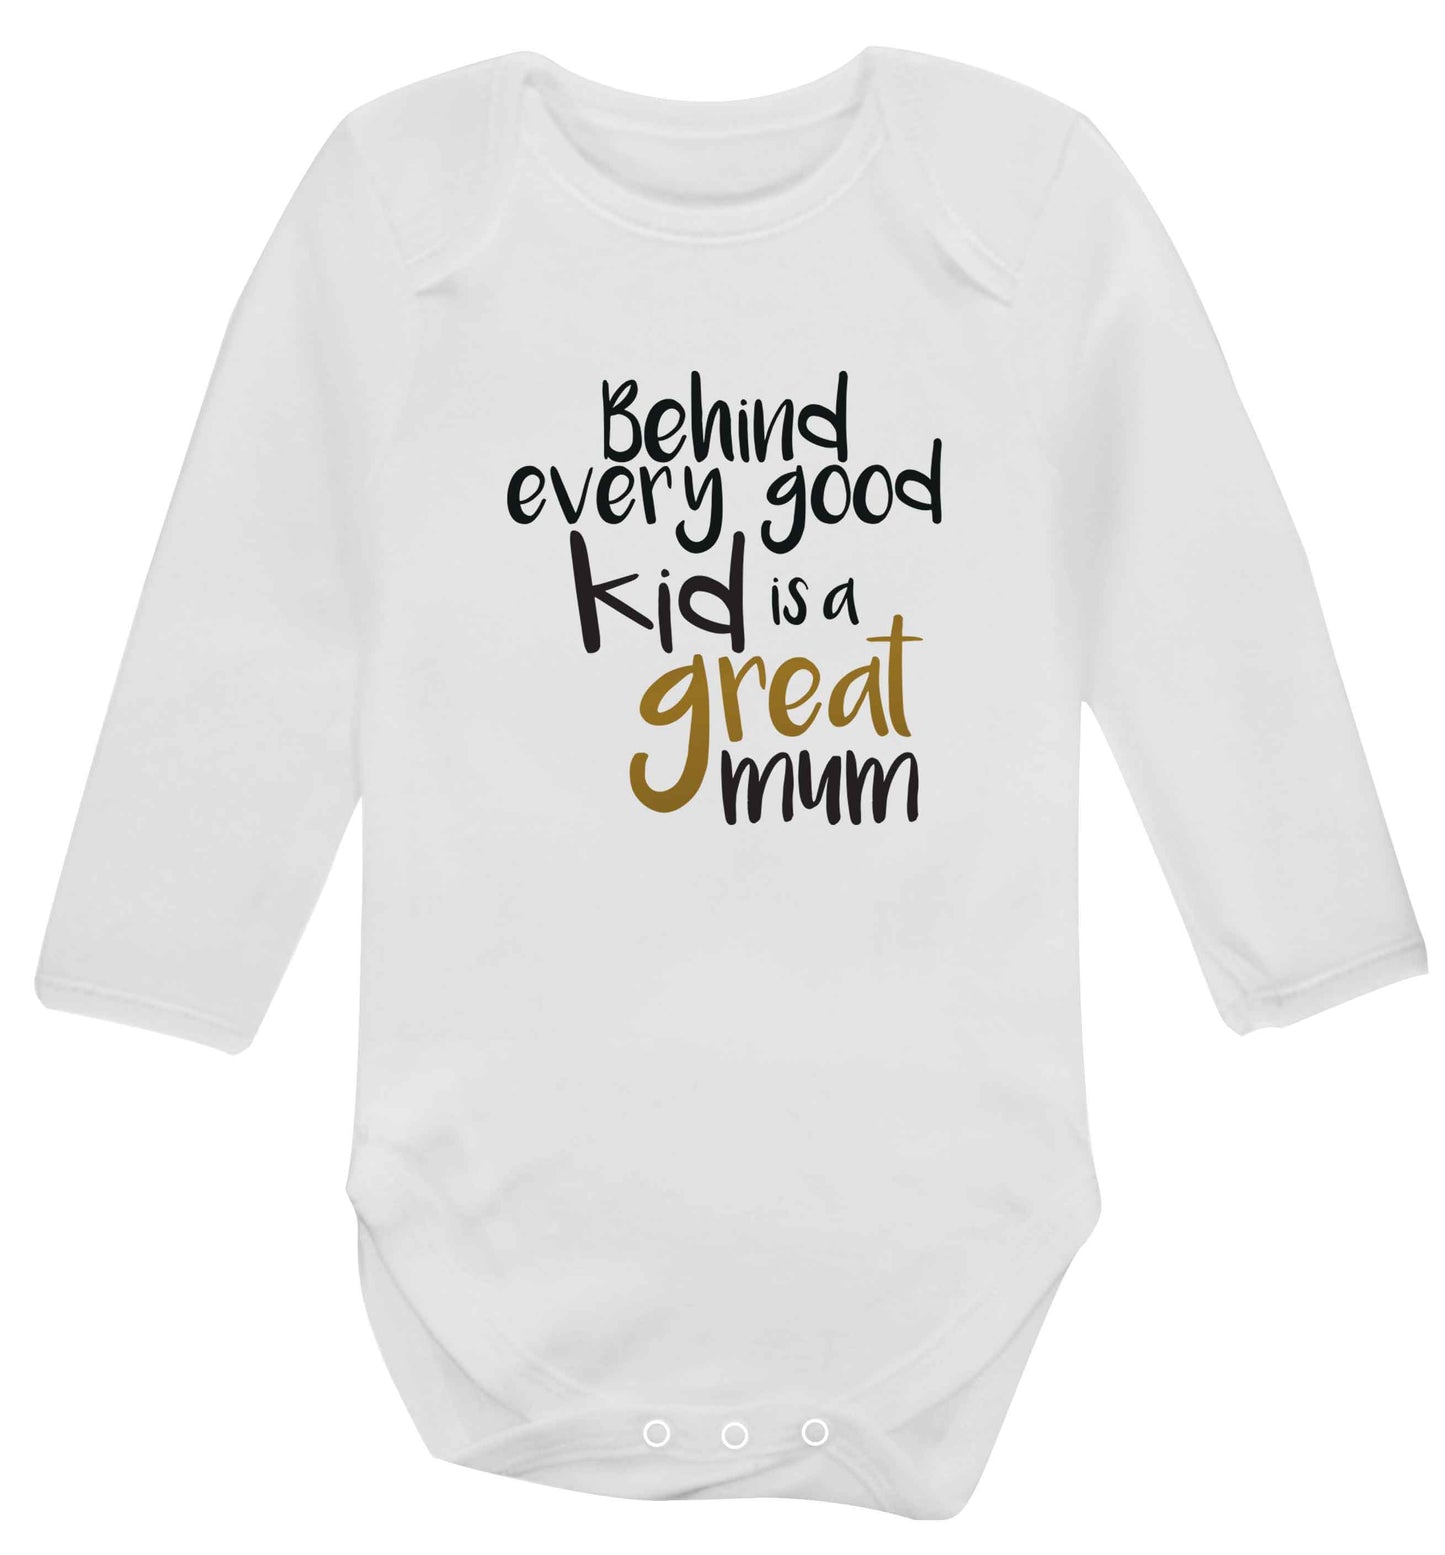 Behind every good kid is a great mum baby vest long sleeved white 6-12 months